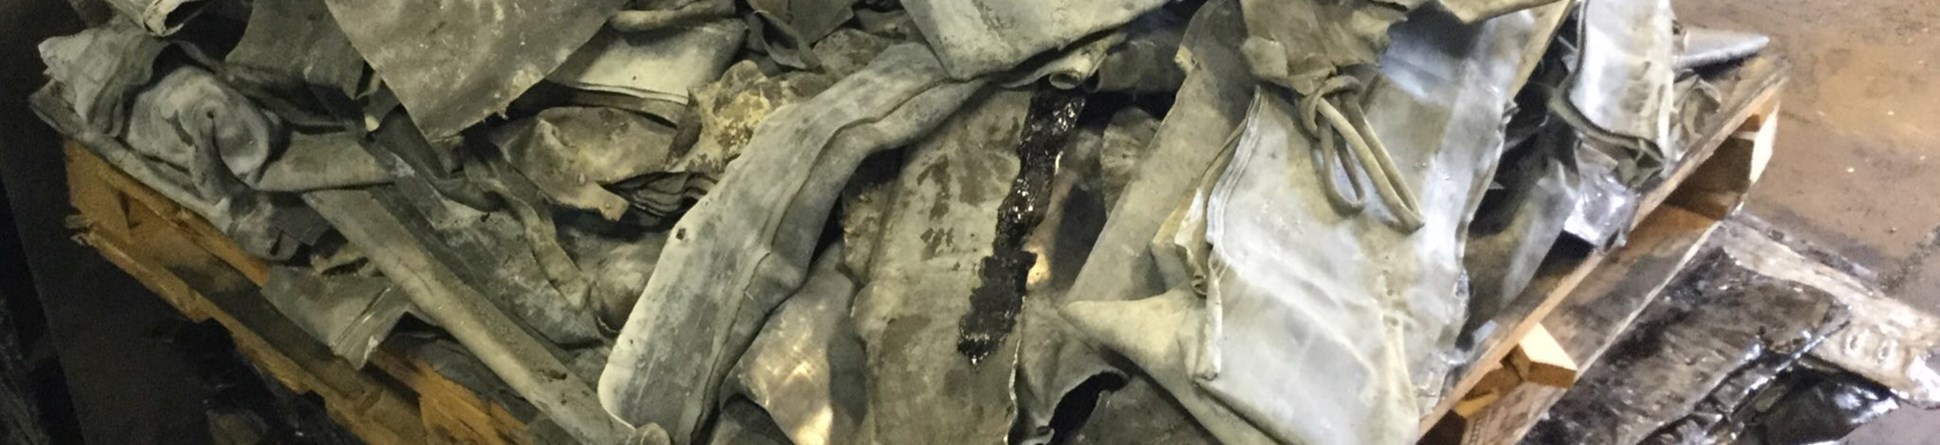 Photo of scrap lead stacked on a pallette at a recycling plant.